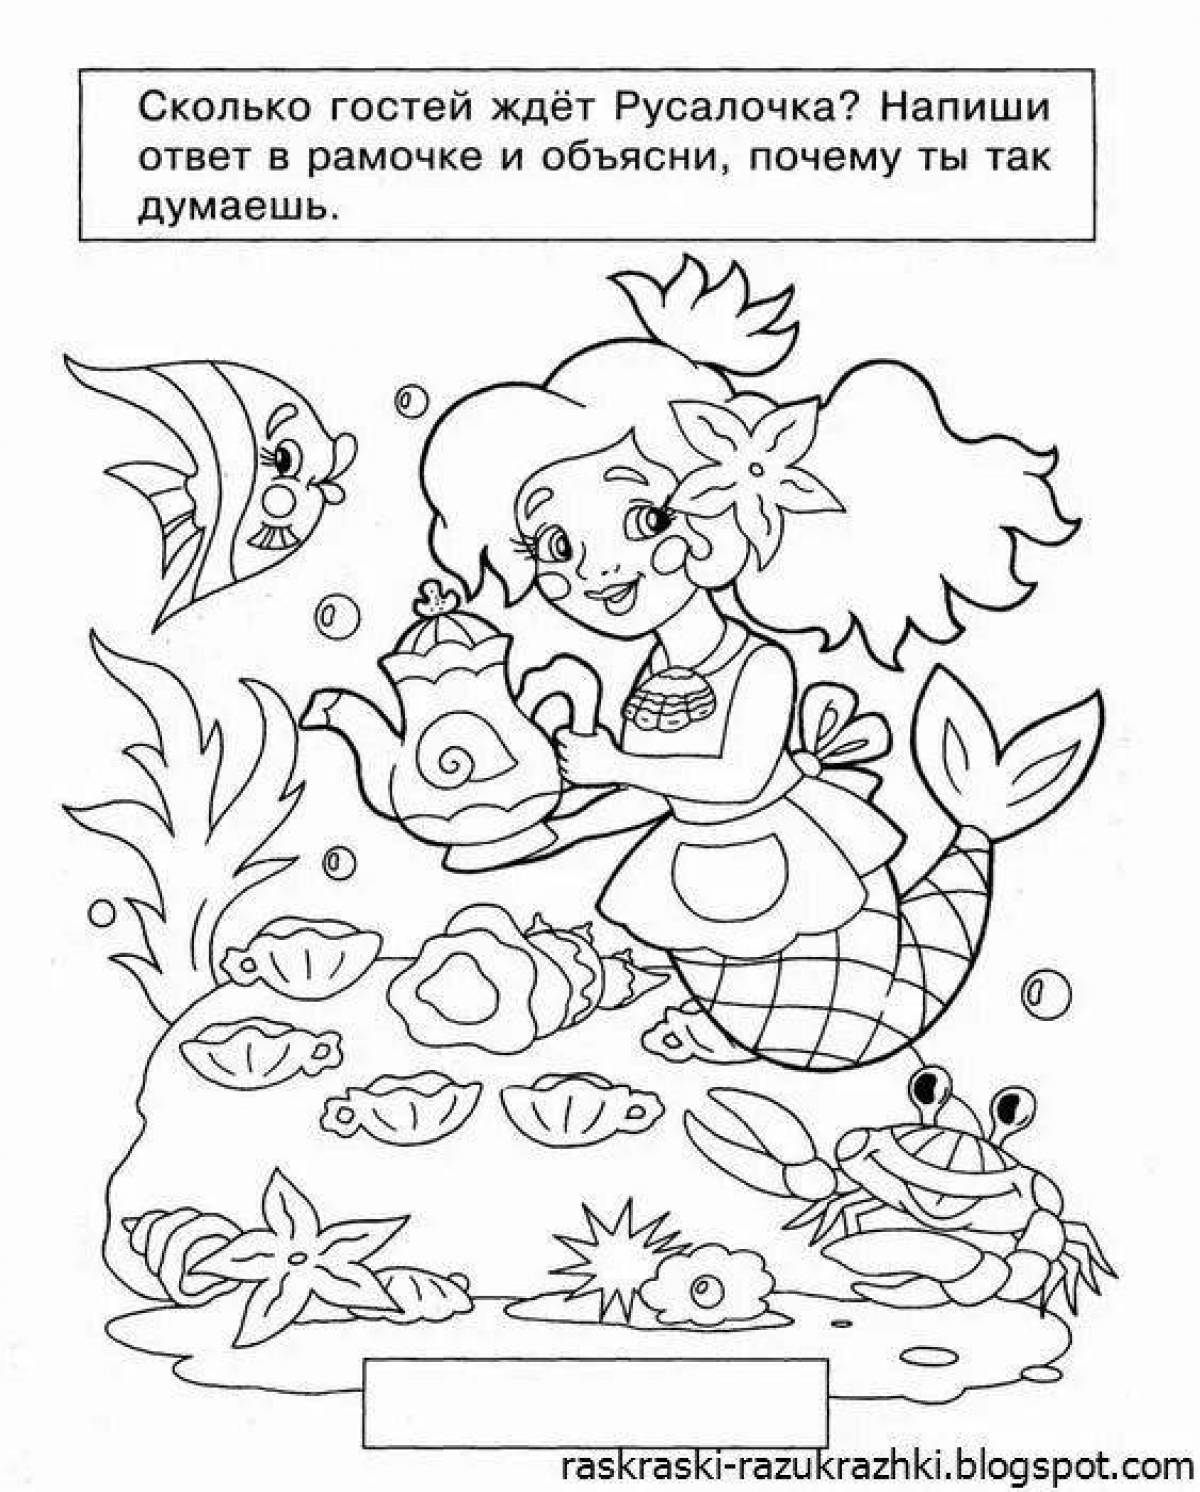 Educational coloring book with tasks